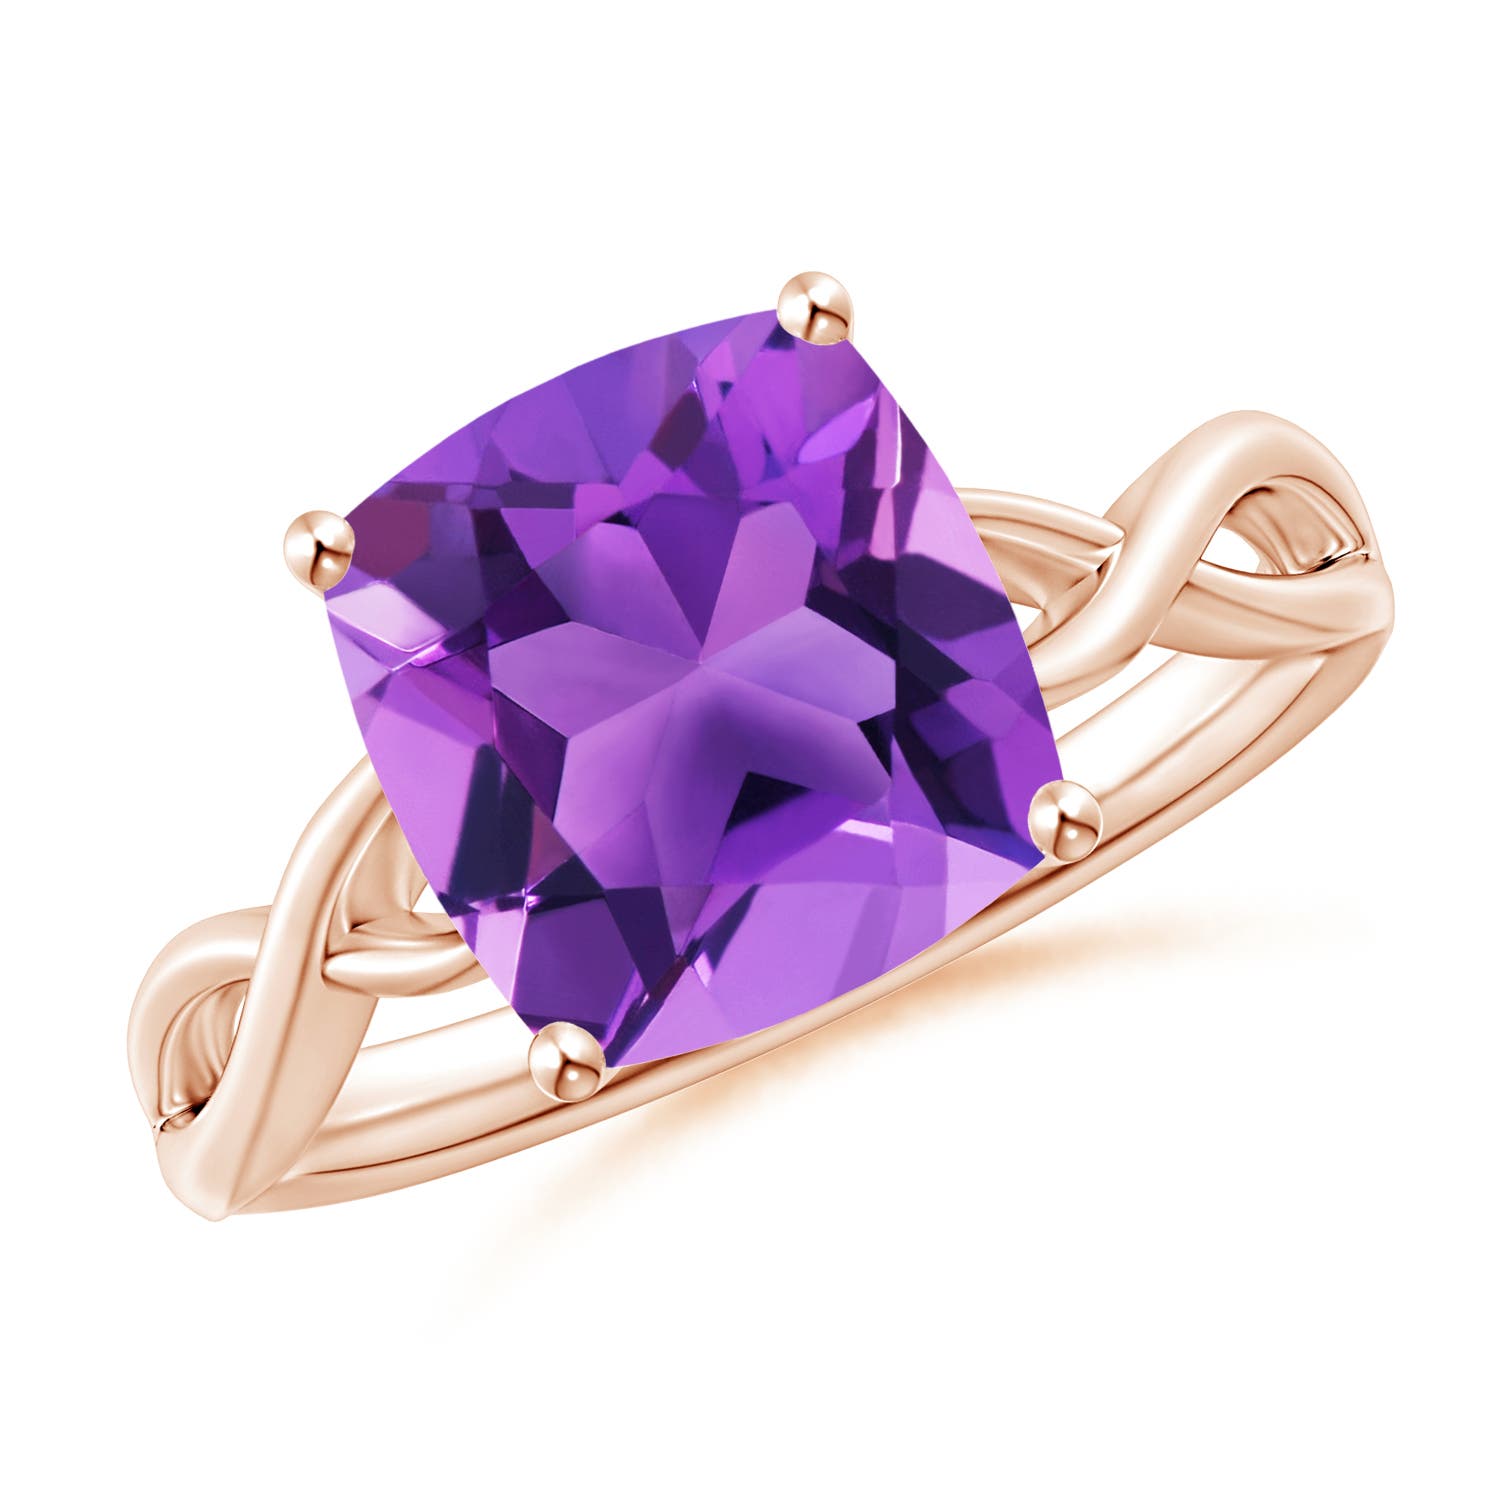 AAA - Amethyst / 3.1 CT / 14 KT Rose Gold